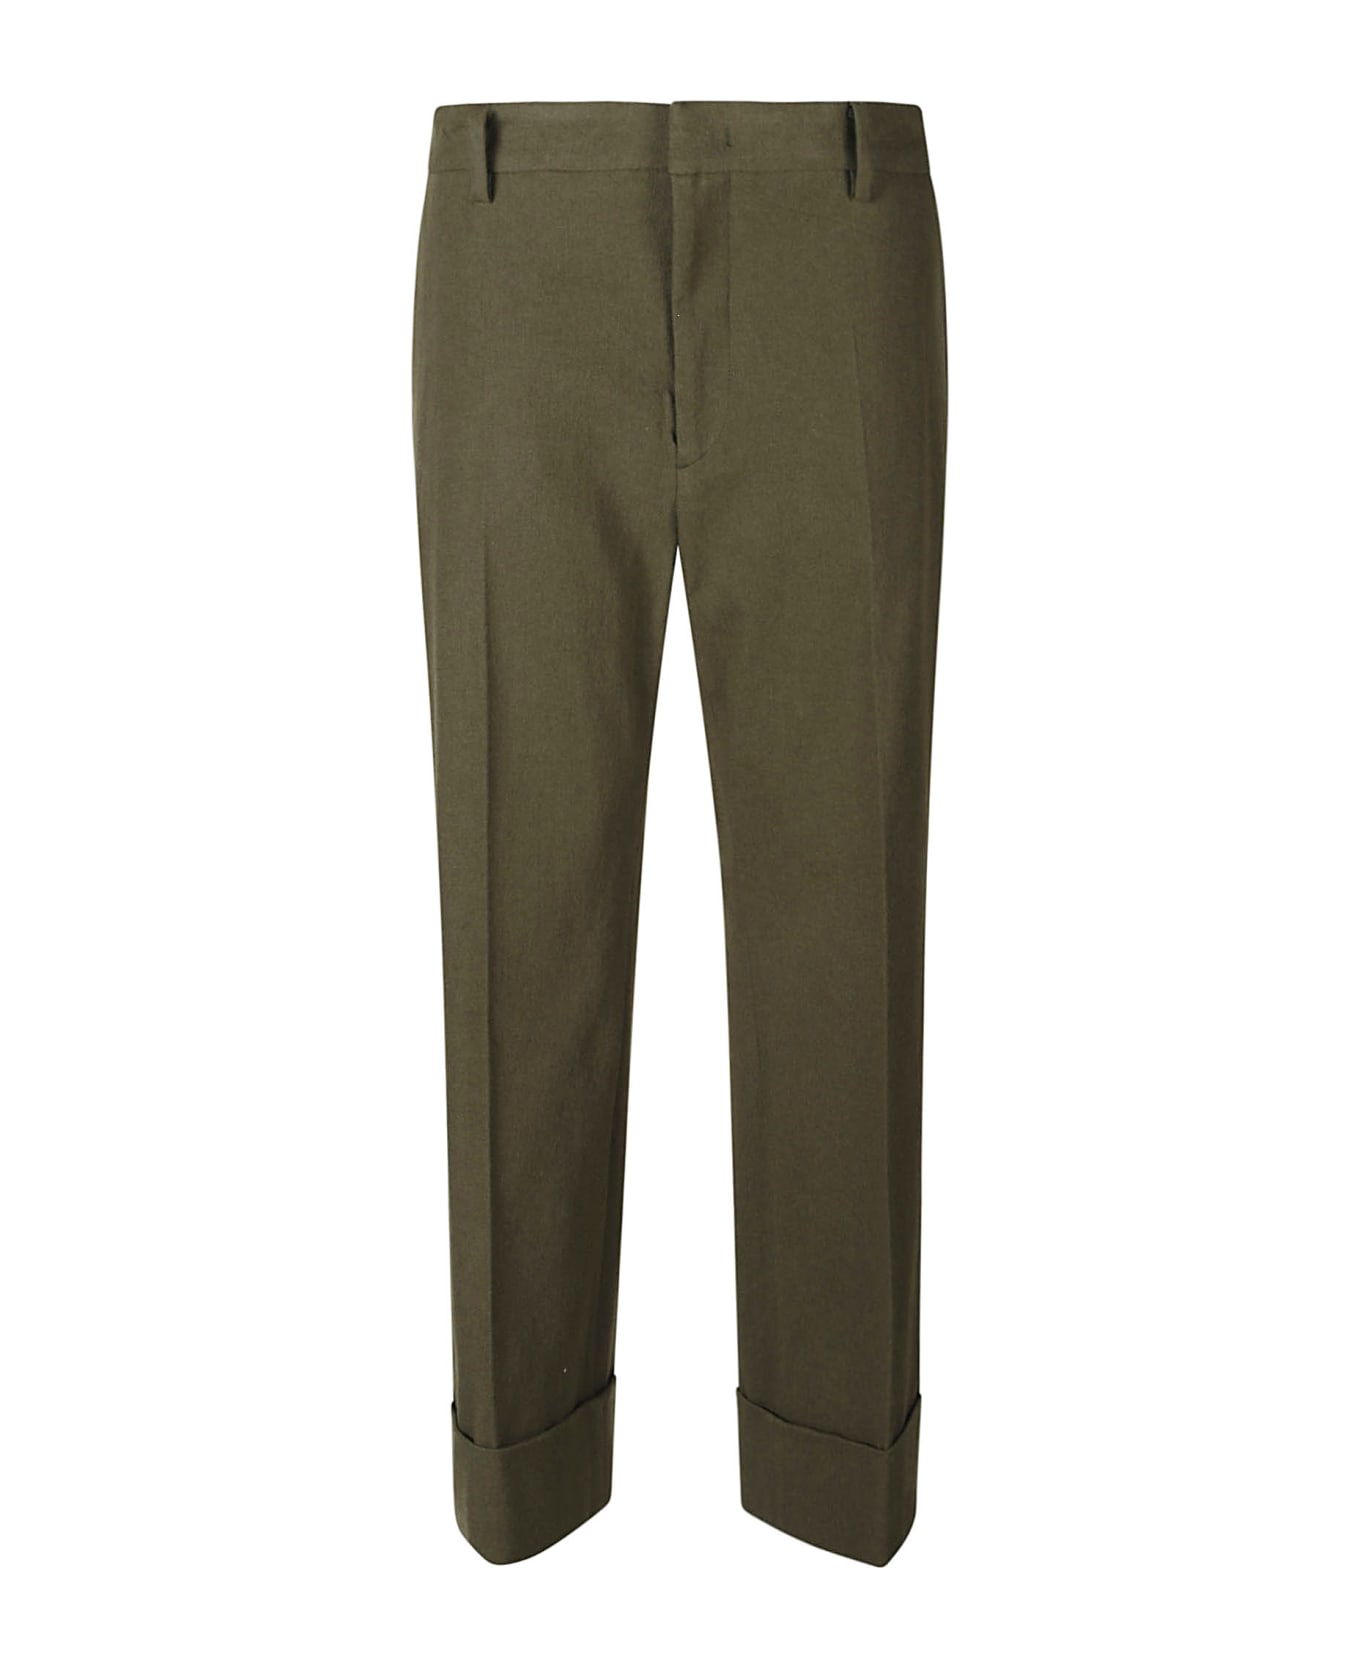 N.21 Straight Concealed Trousers - Green ボトムス